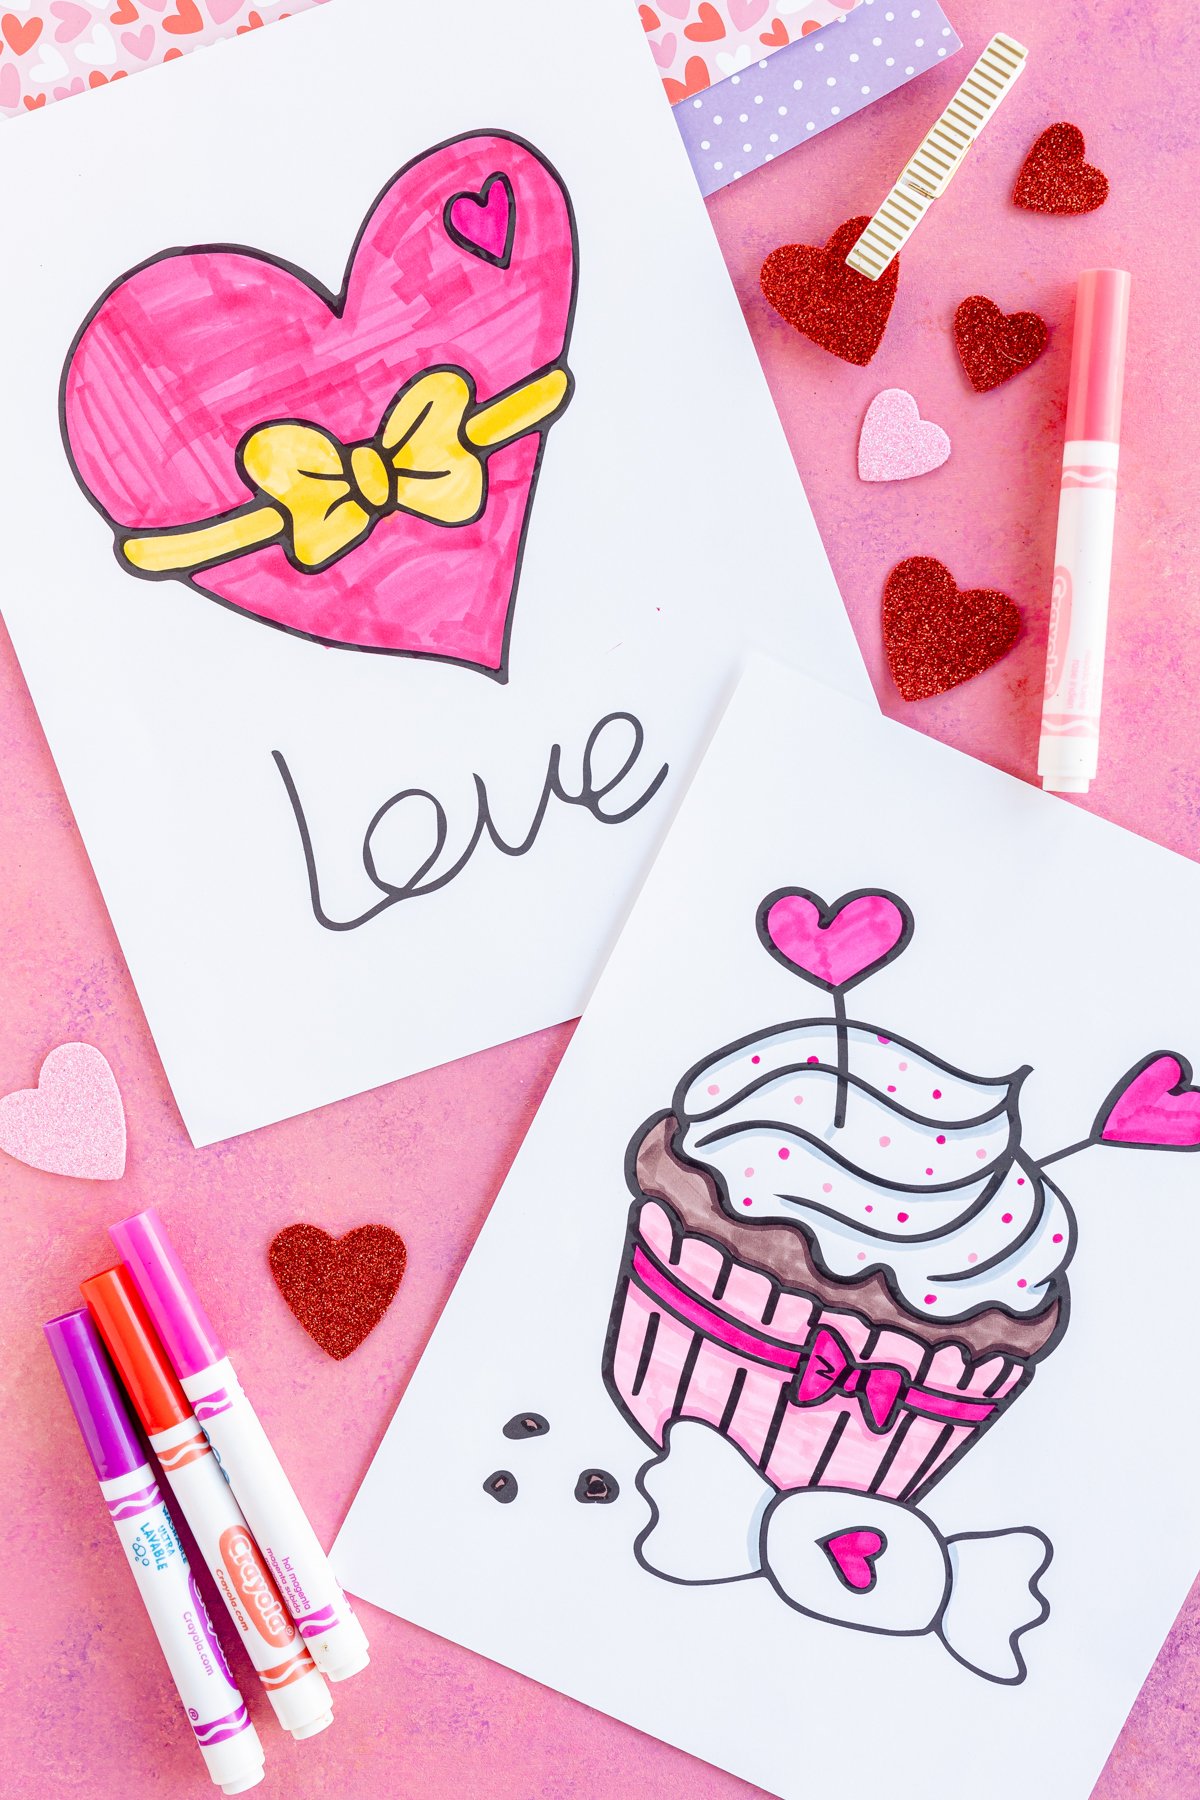 filled in coloring sheet with heart and cupcake design